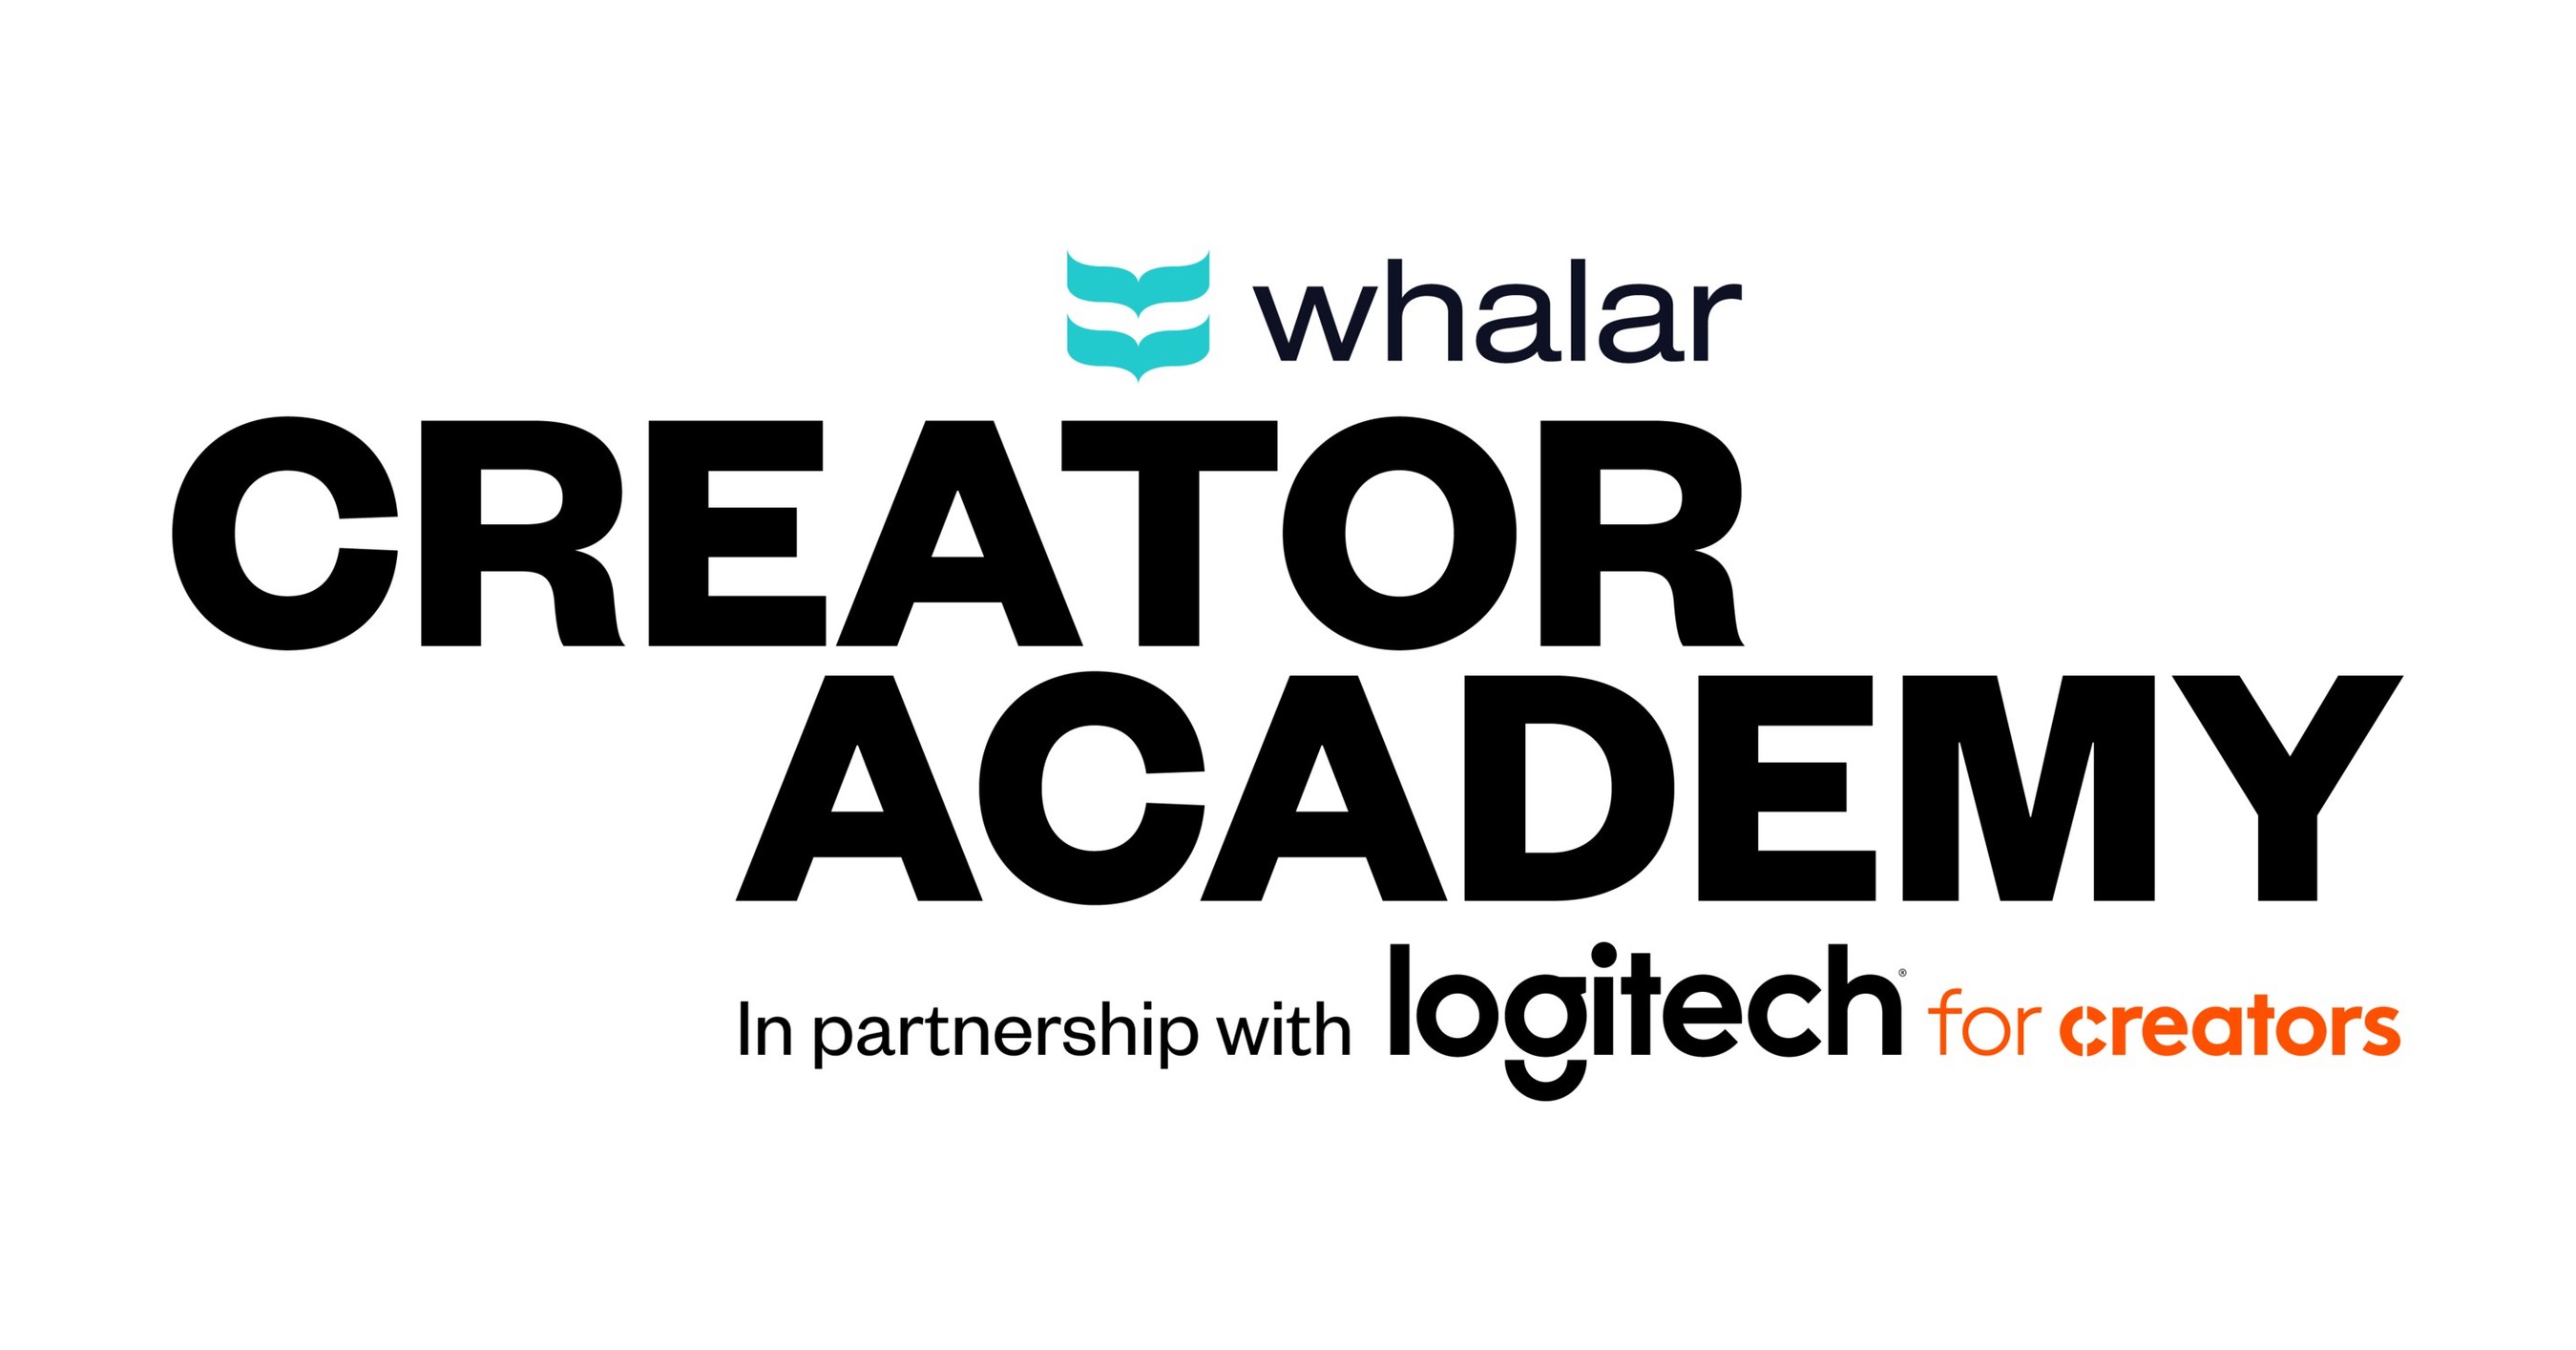 Whalar and Logitech Team Up To Launch Accelerator Program For